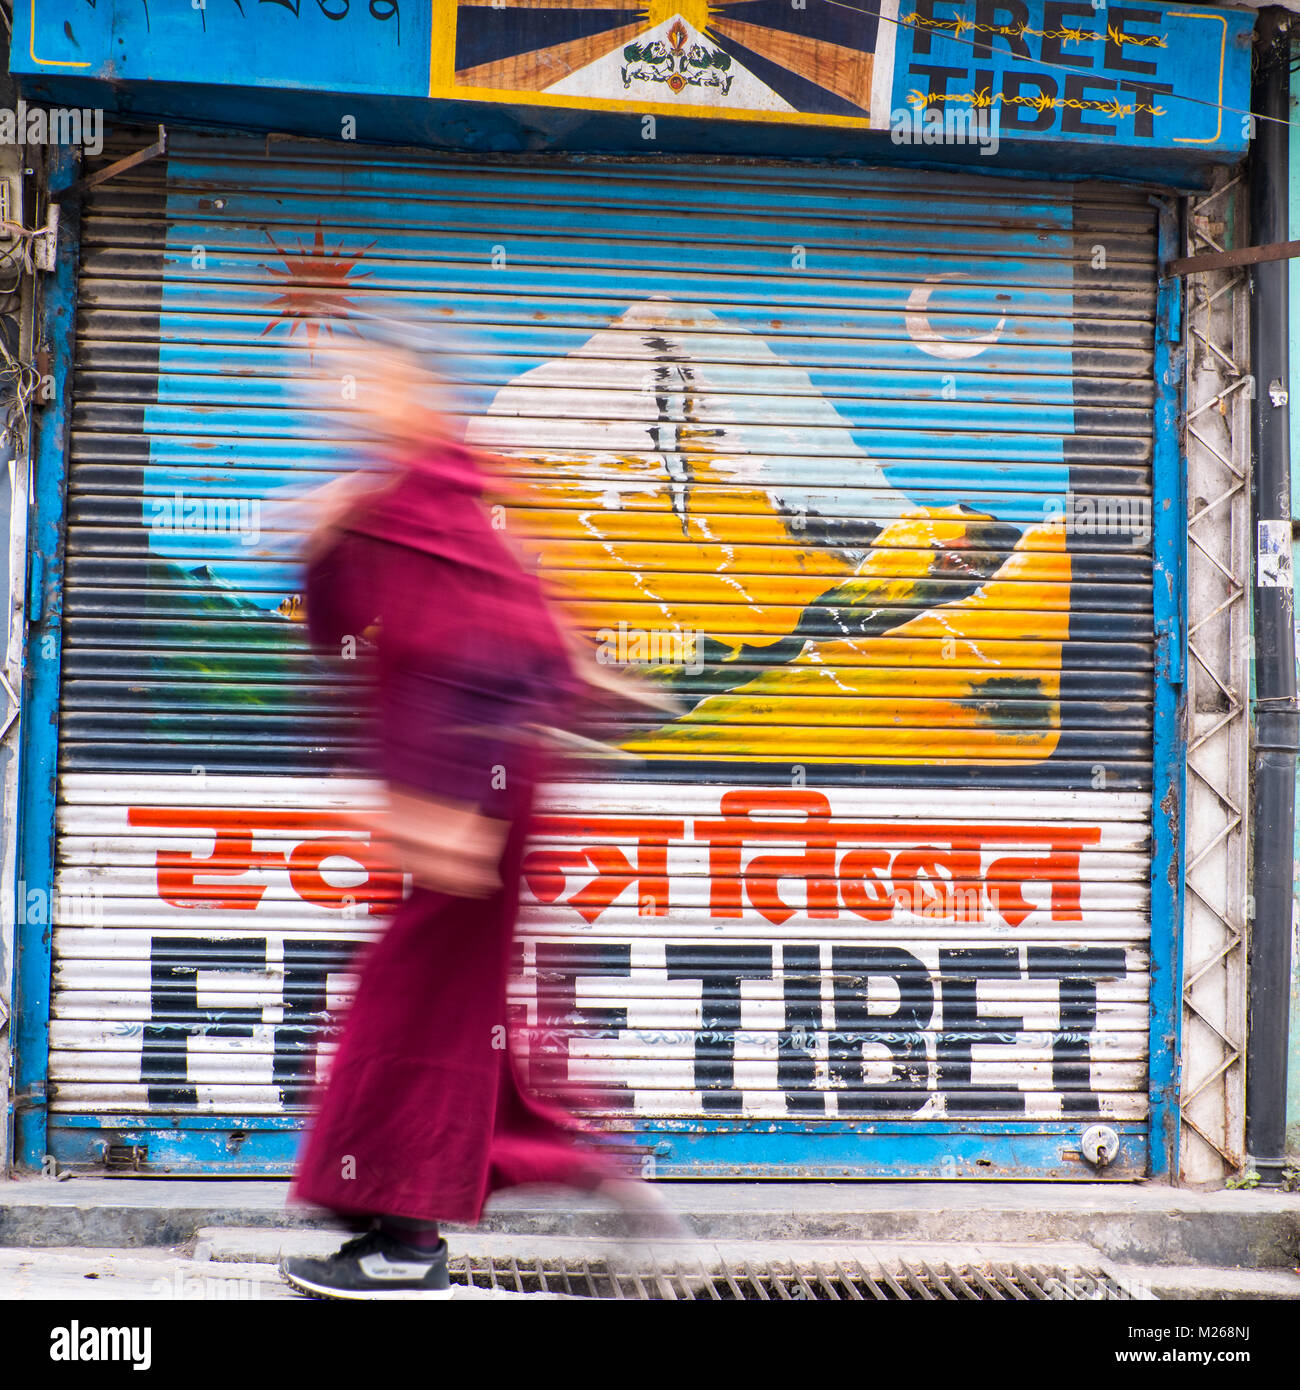 A Buddhist monk passes a 'FREE TIBET' mural in Daramshala,India Stock Photo